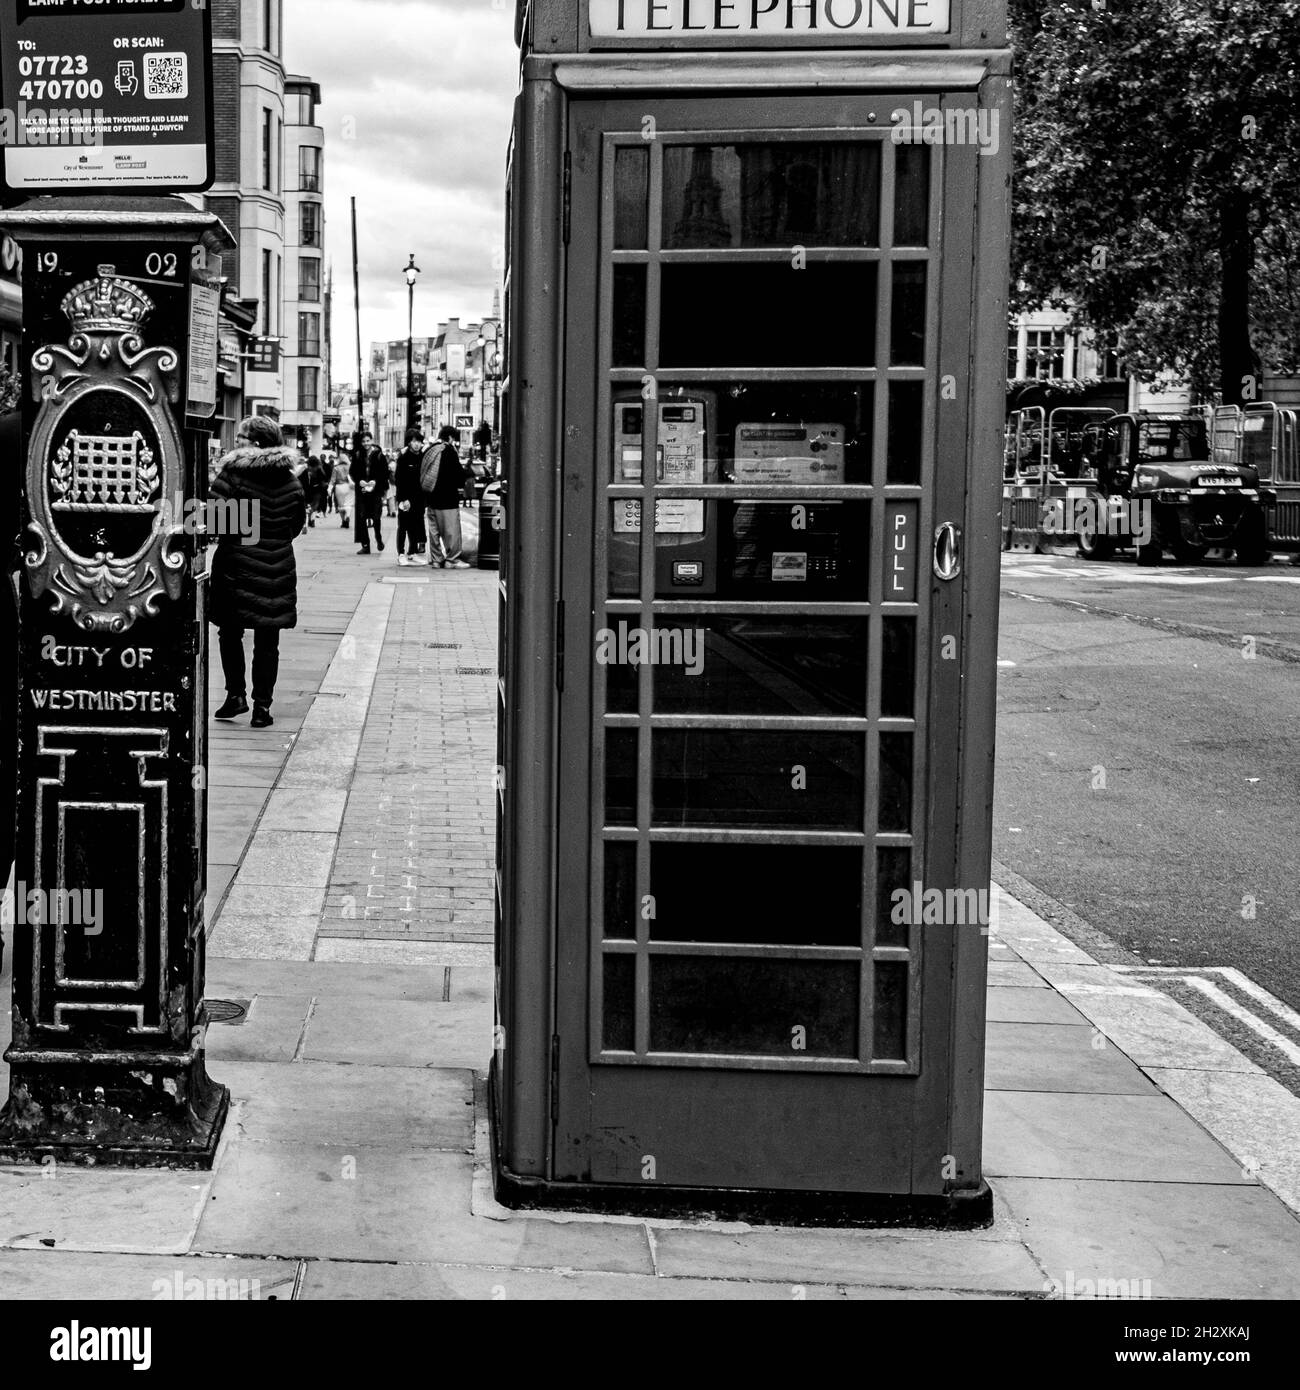 Traditional London Public Telephone Box Pay Phone With No People Stock Photo